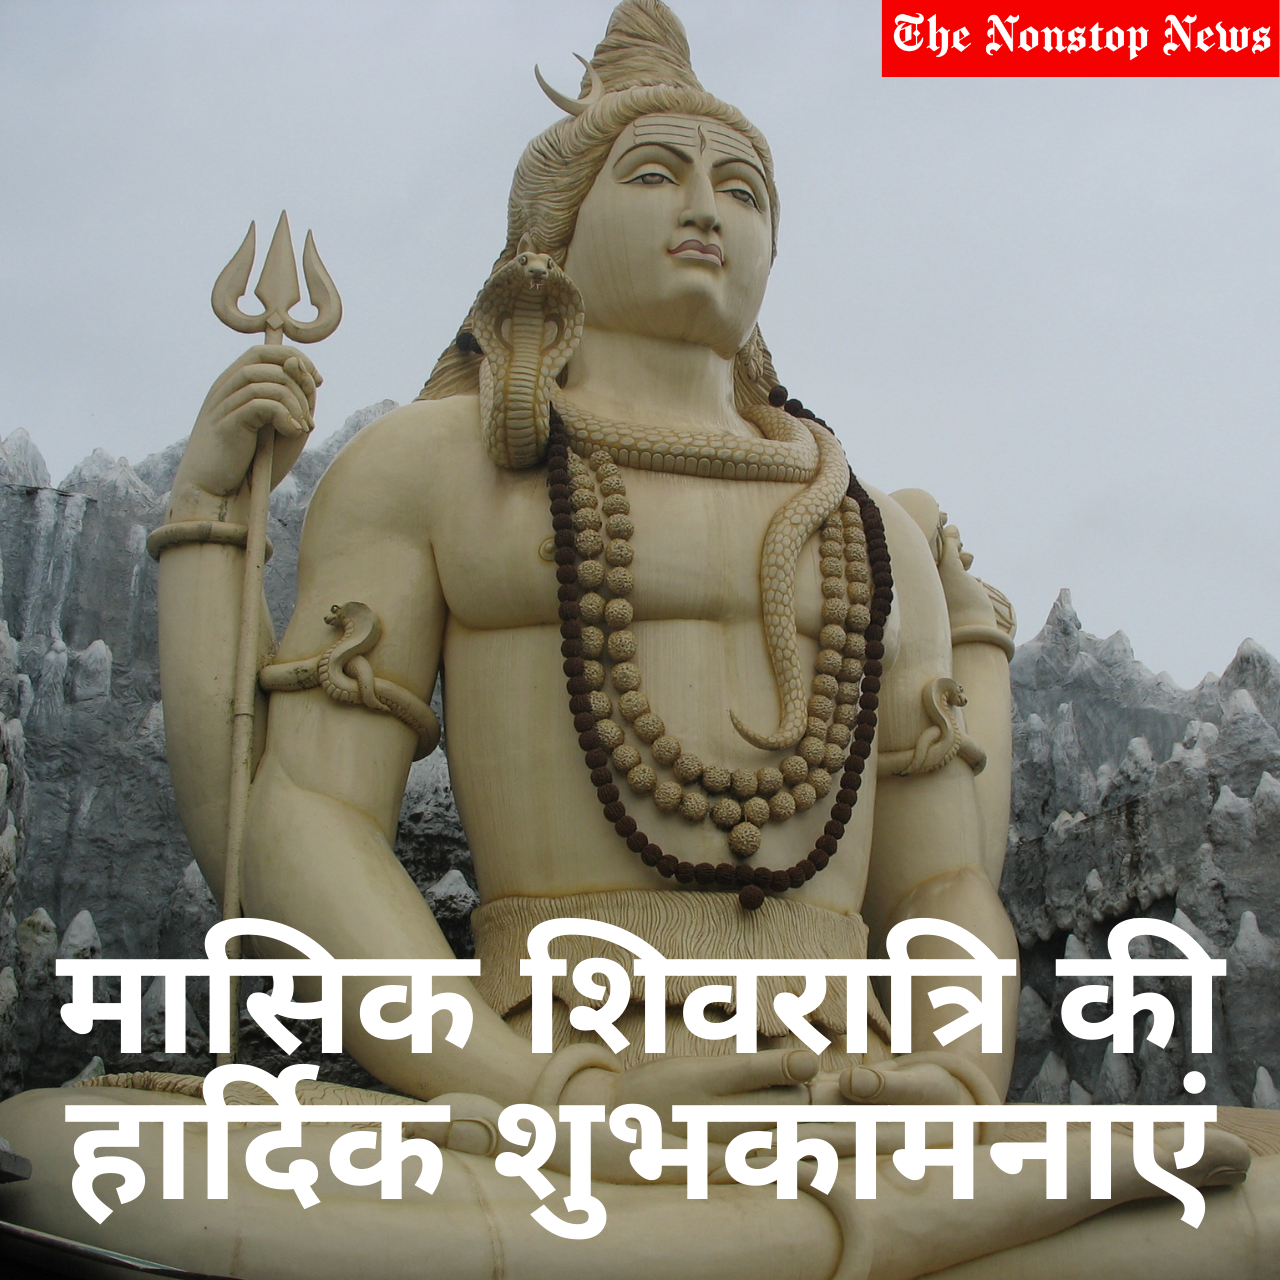 Happy Masik Shivratri 2021 Quotes Hindi Messages, Greetings, Wishes, and HD Images to Share